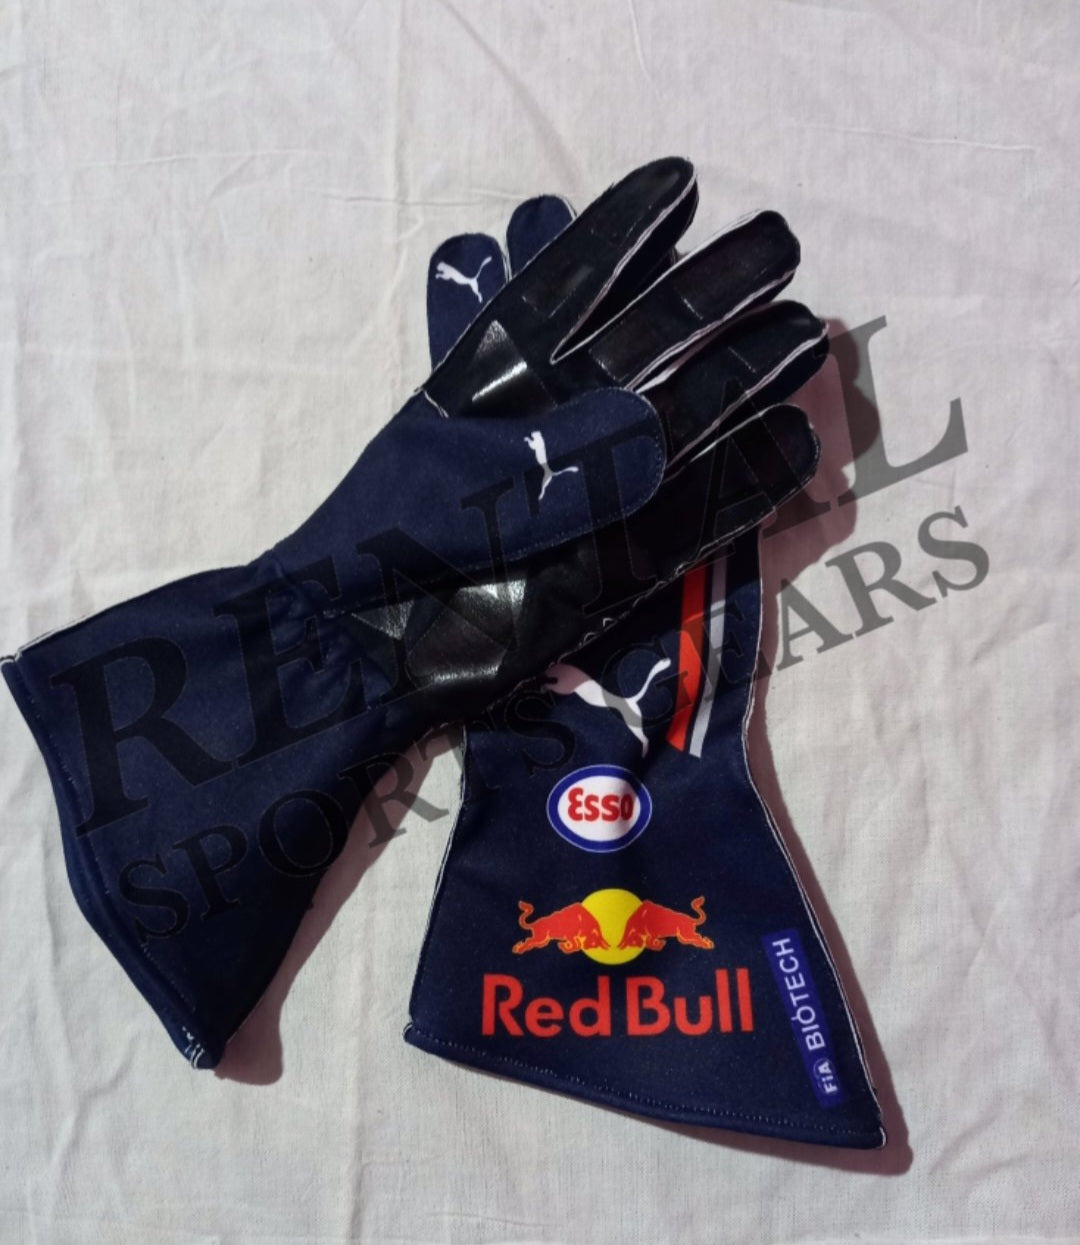 2019 Pierre Gasly Race Red Bull Racing F1 Gloves - F1 Replica Gloves